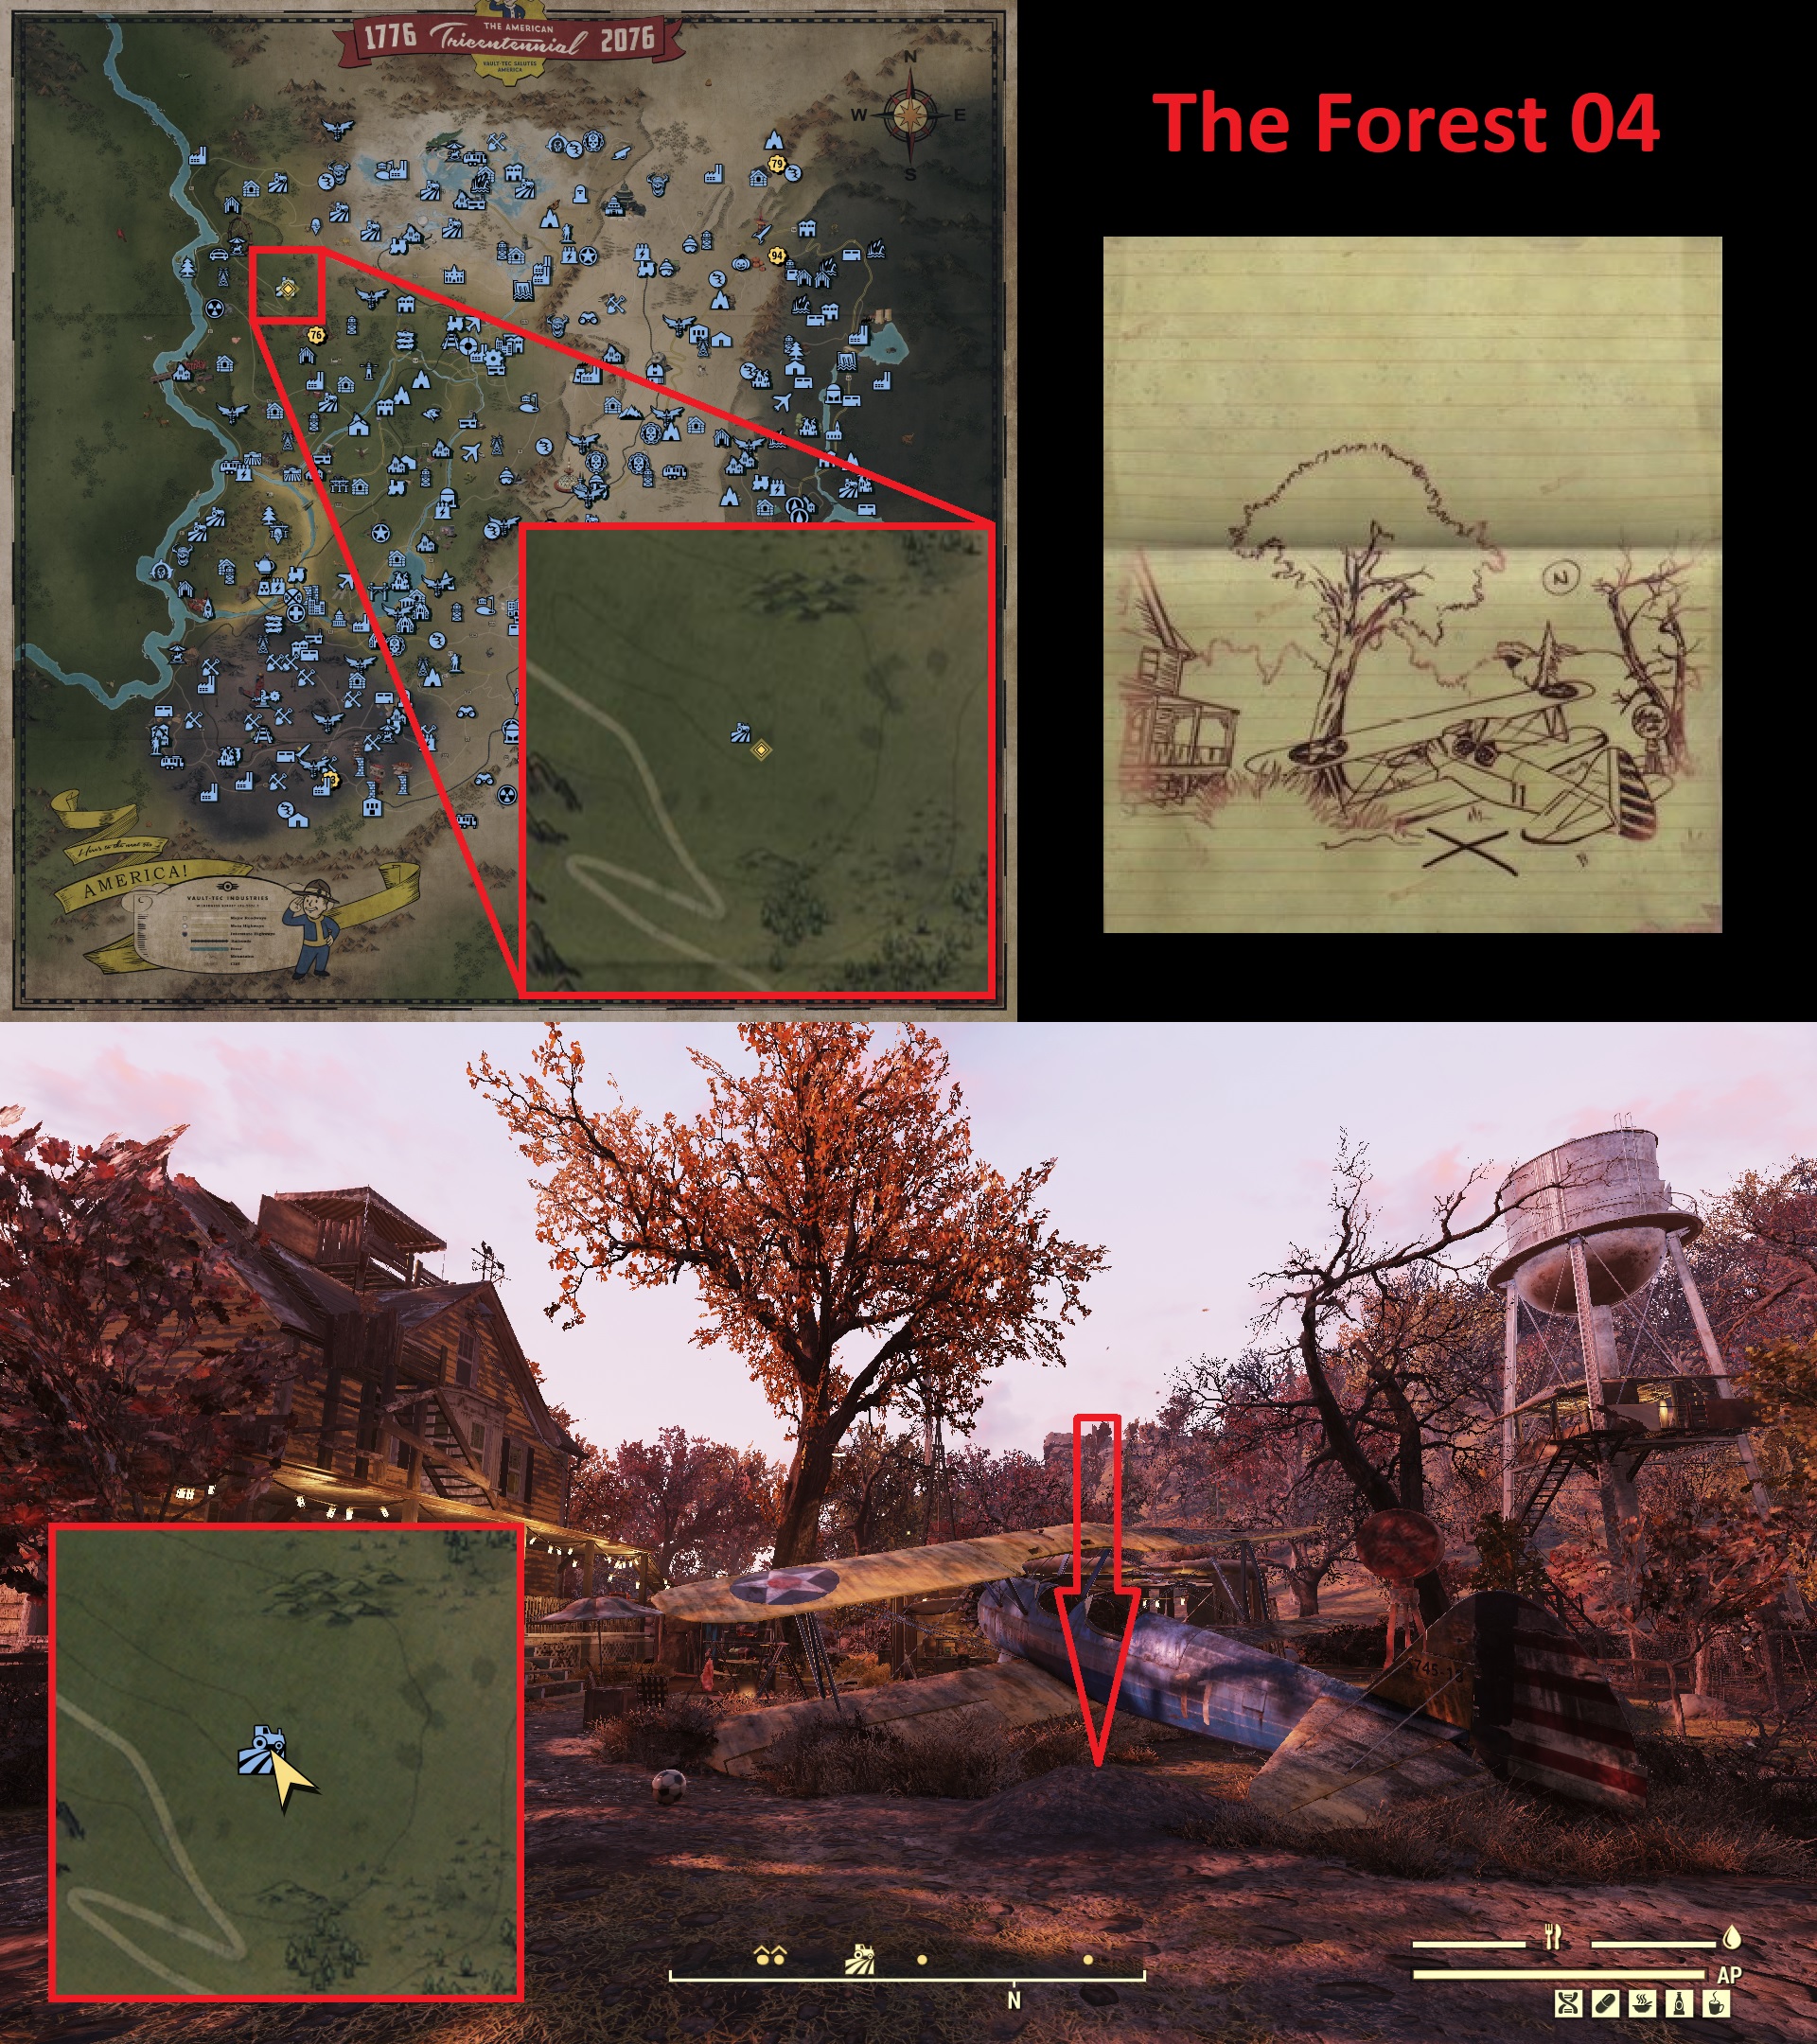 Fallout 76 Treasure Map Locations - The Forest 04 - 725264A